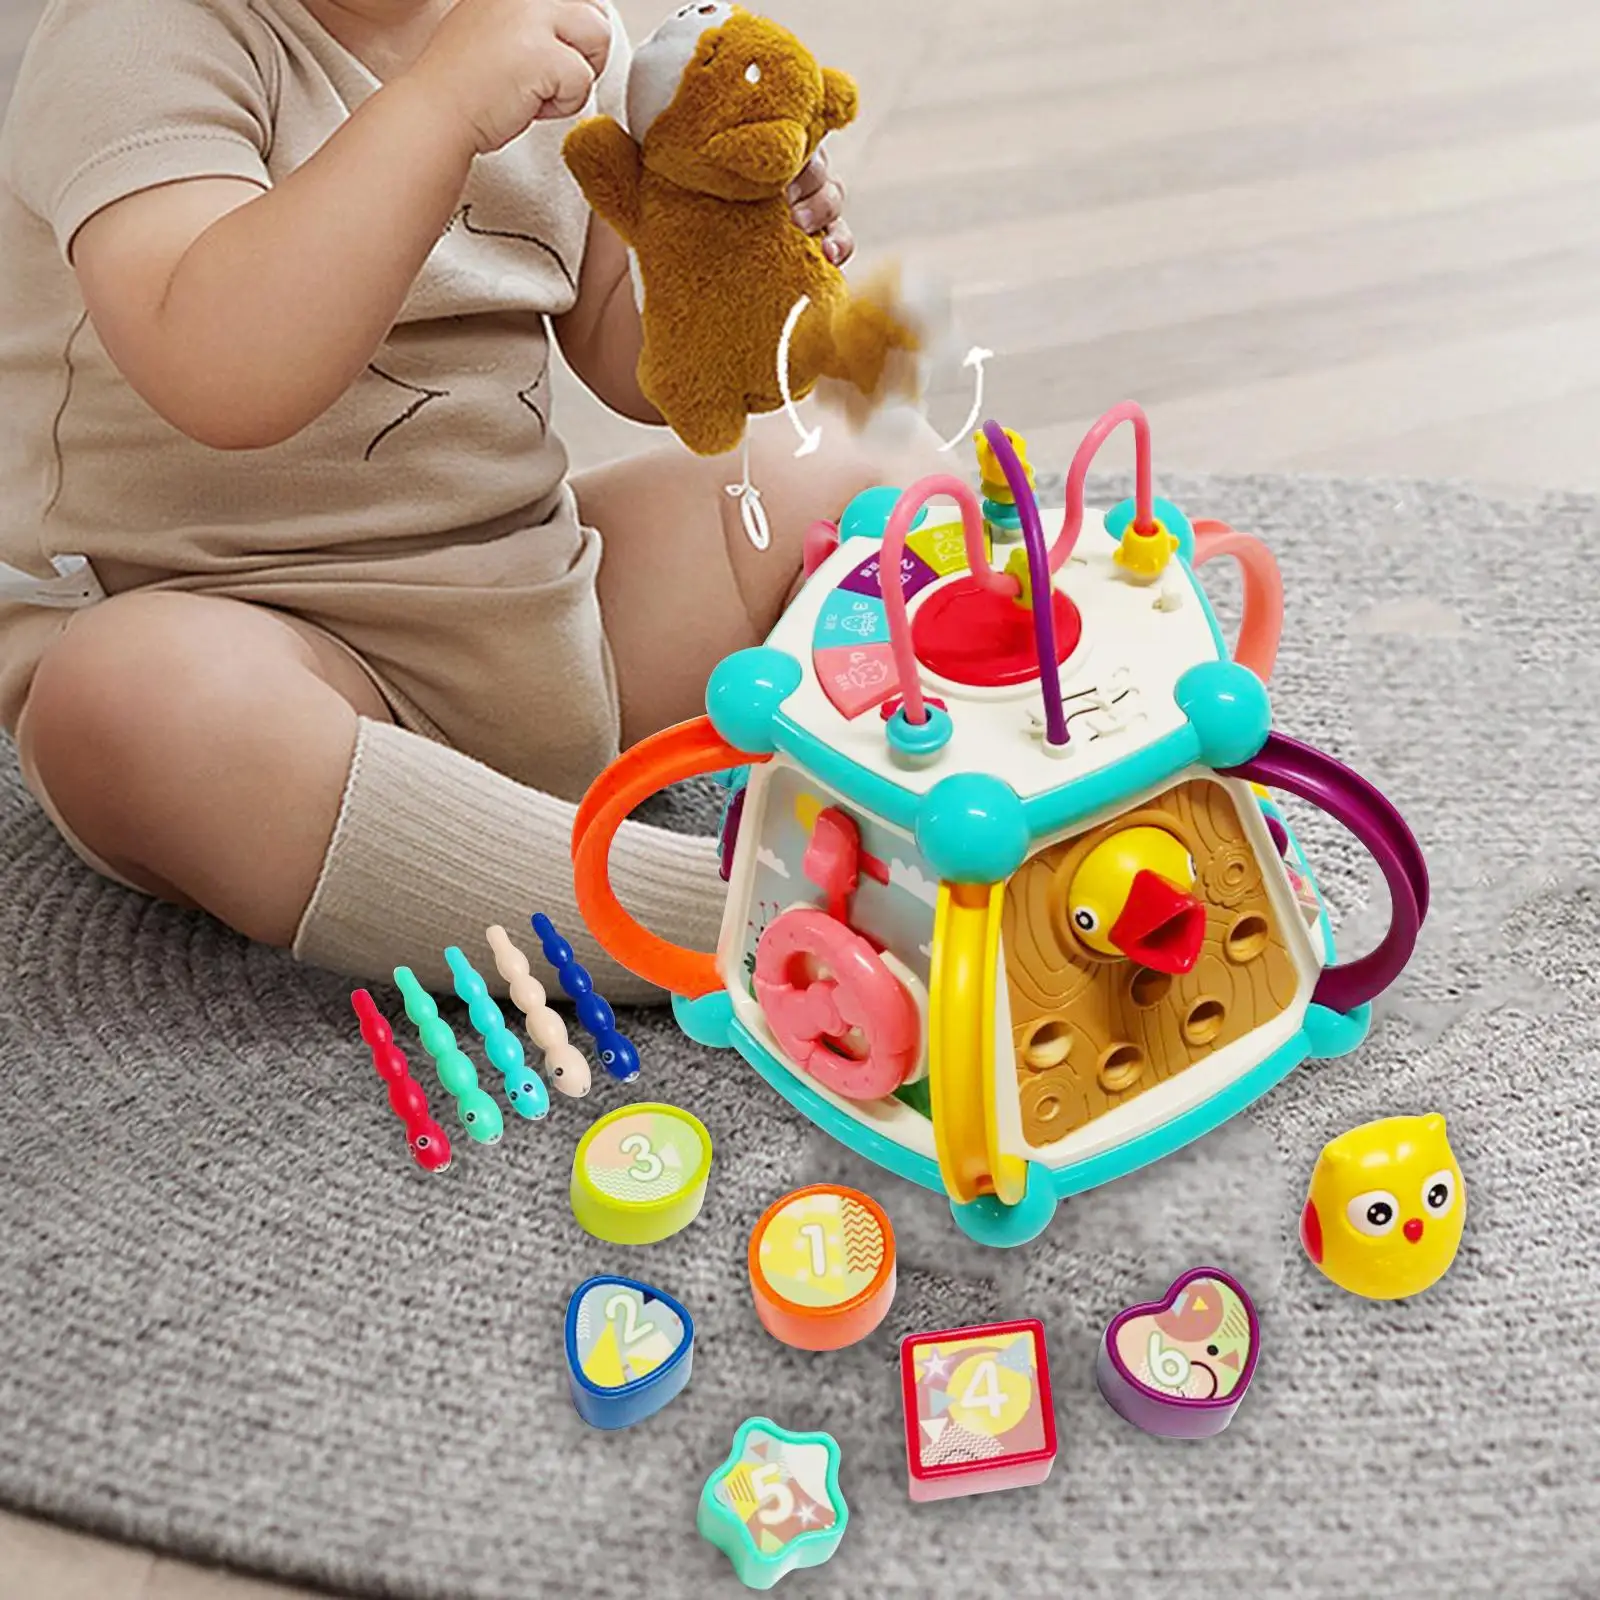 Baby Toy with Bead Maze Shape Sorter Montessori Musical Activity Cube Toy for 1 Year Olds Toddlers Kids Boys Girls Birthday Gift